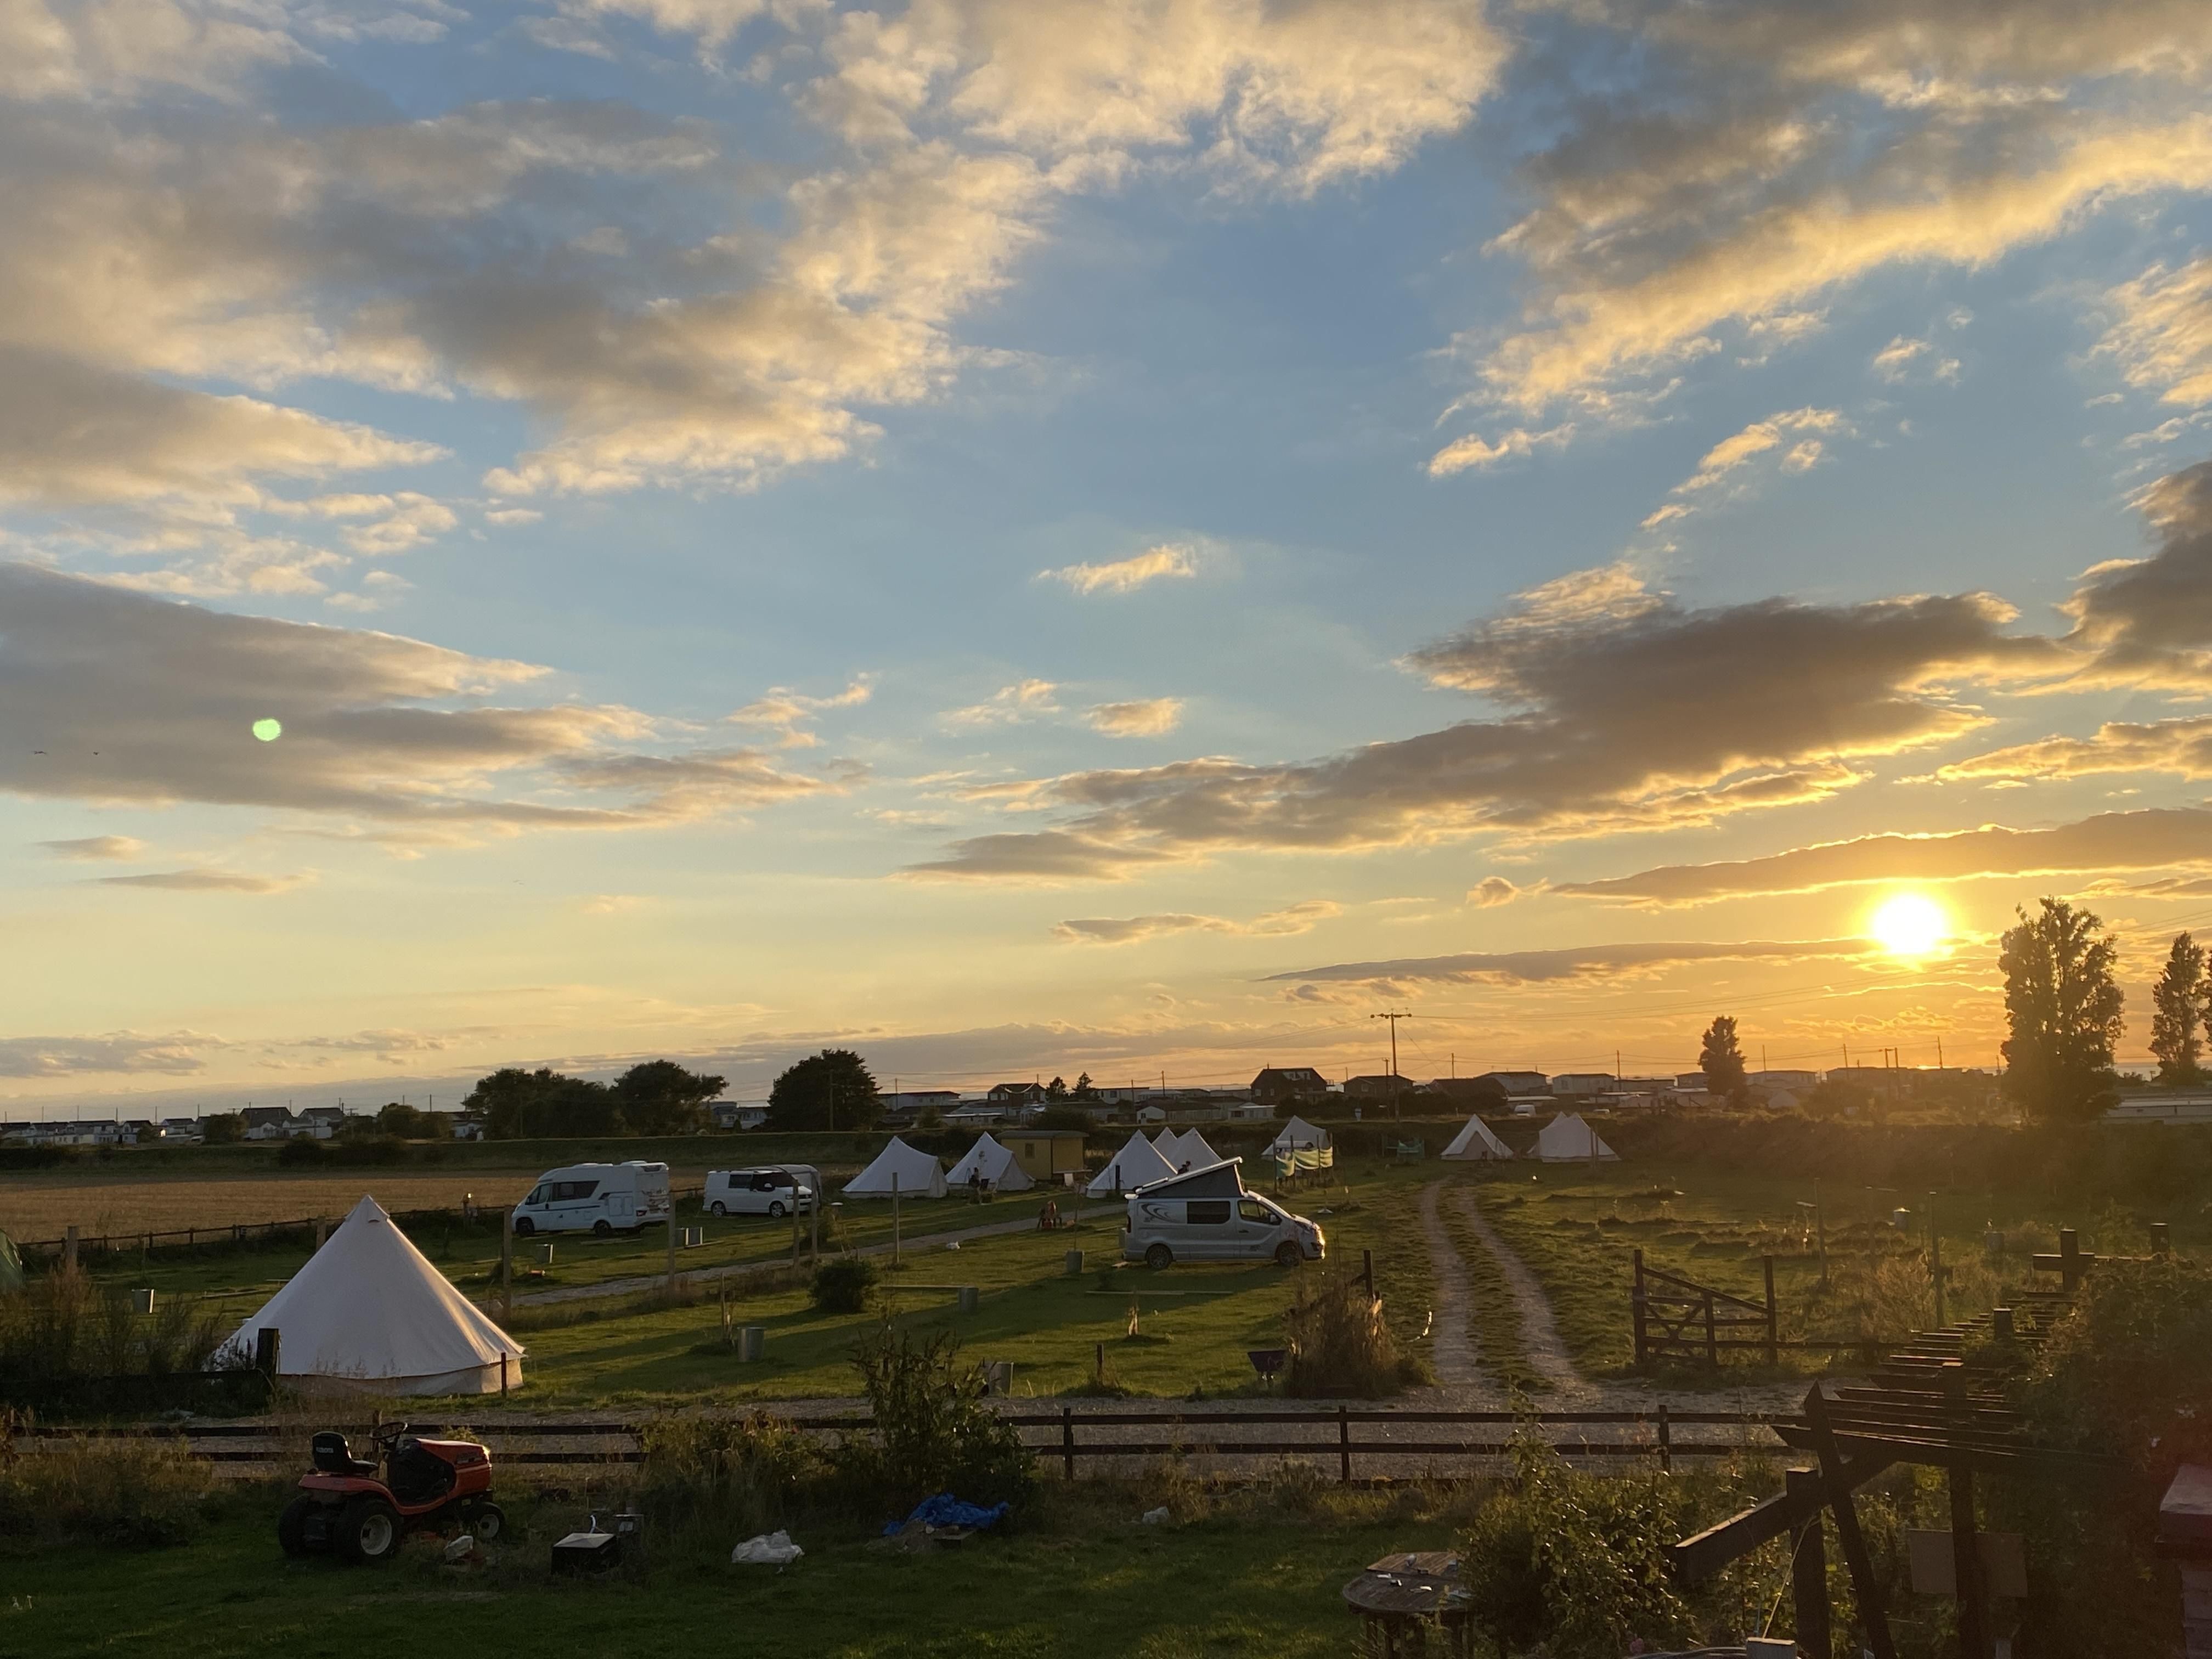 Hunstanton Camping: Sunset covering the campsite